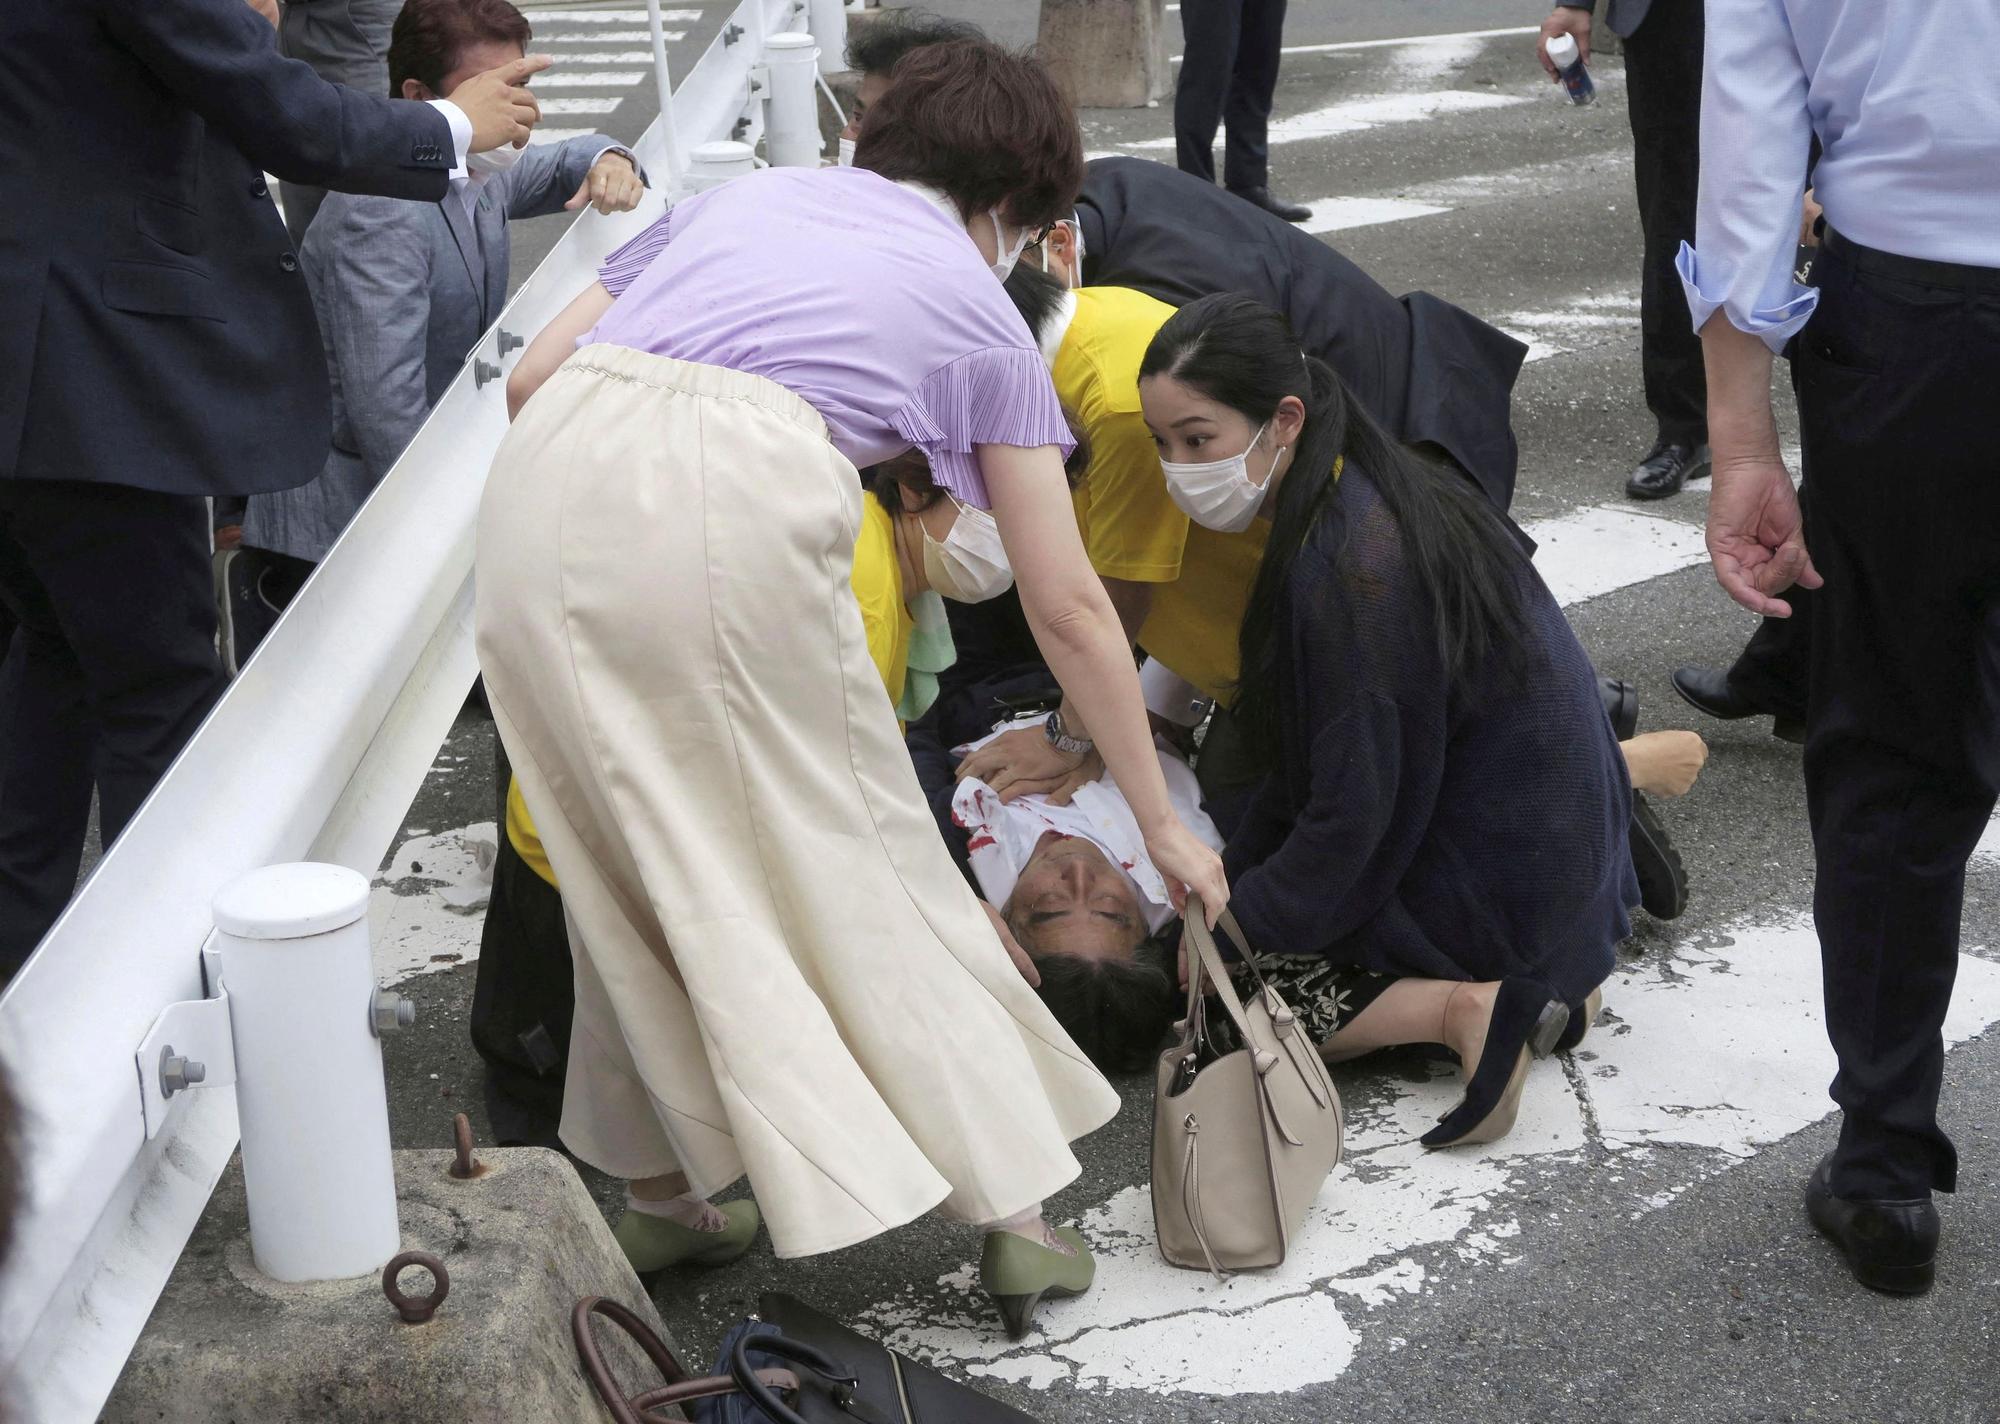 Former Japanese prime minister Shinzo Abe lies on the ground after apparent shooting during an election campaign in Nara, Japan